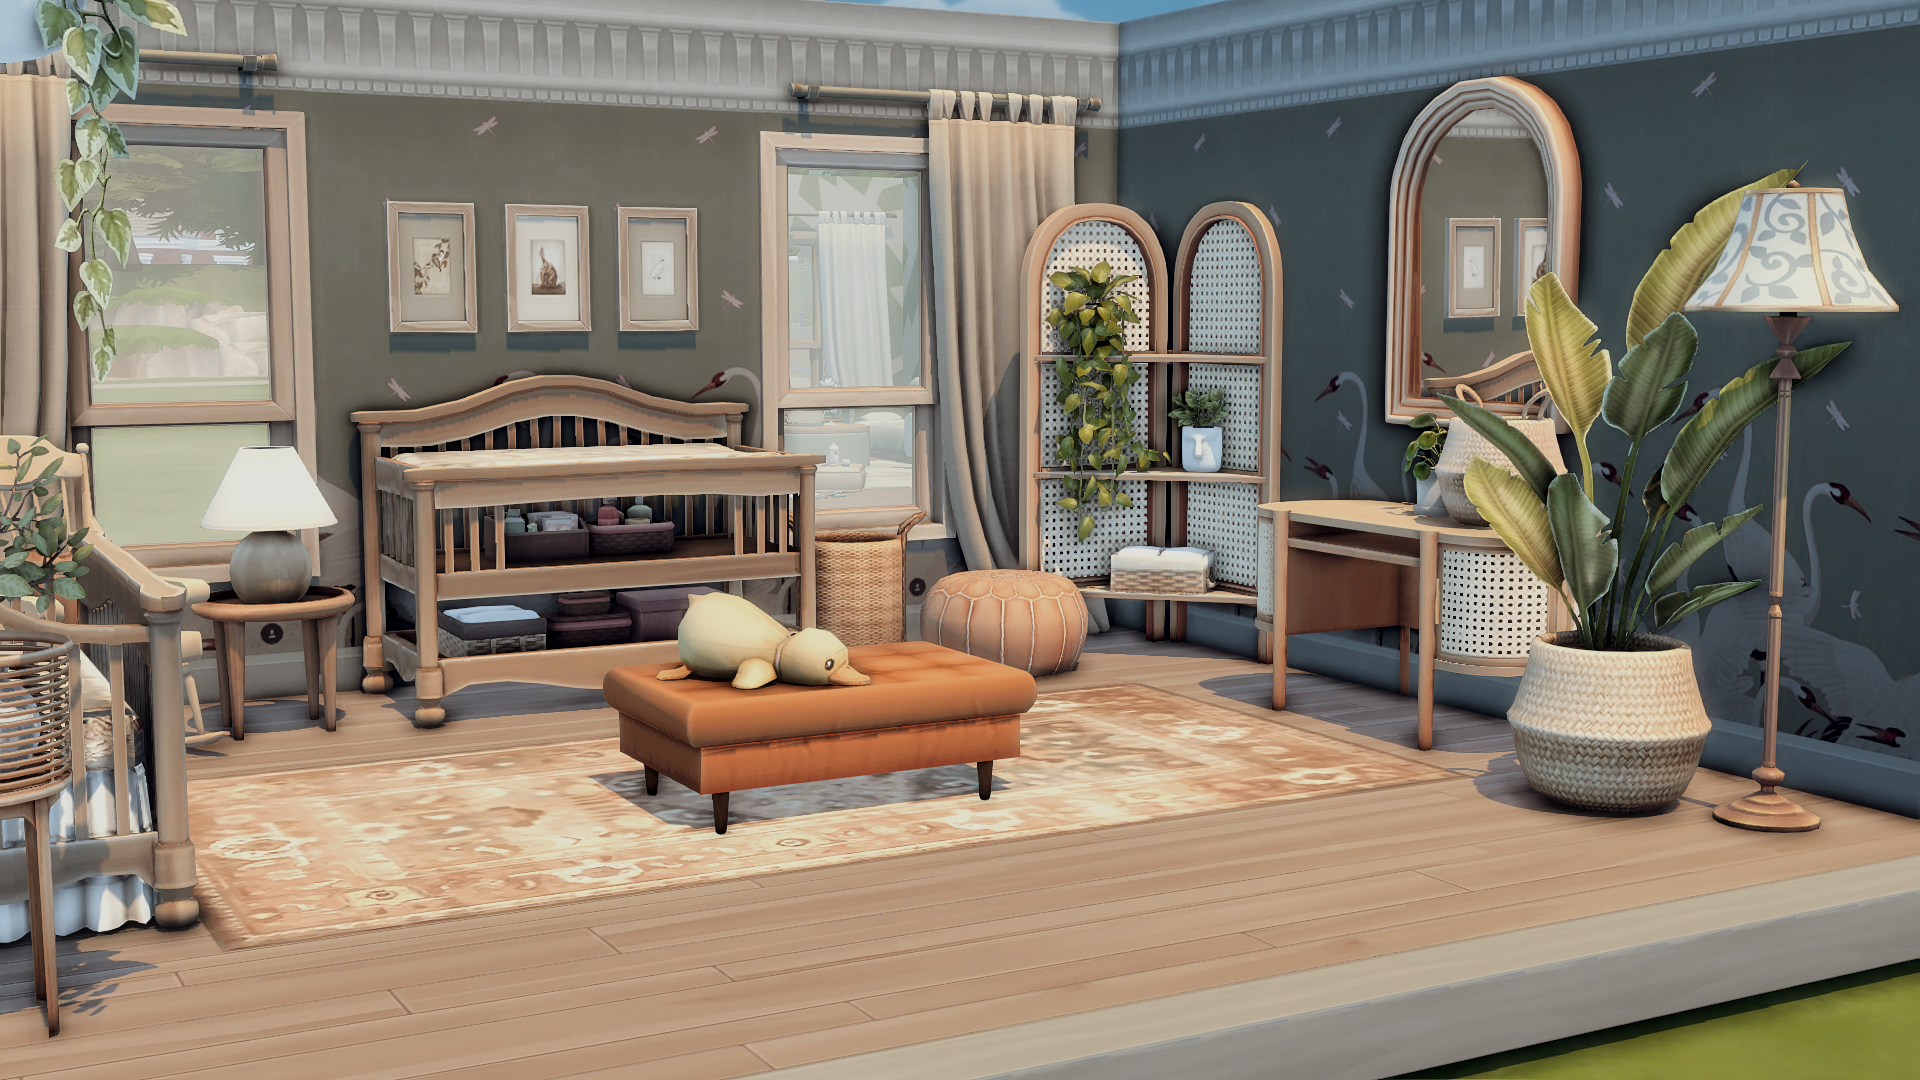 Boho Baby Bedroom CC Pack - The Sims 4 Build / Buy - CurseForge